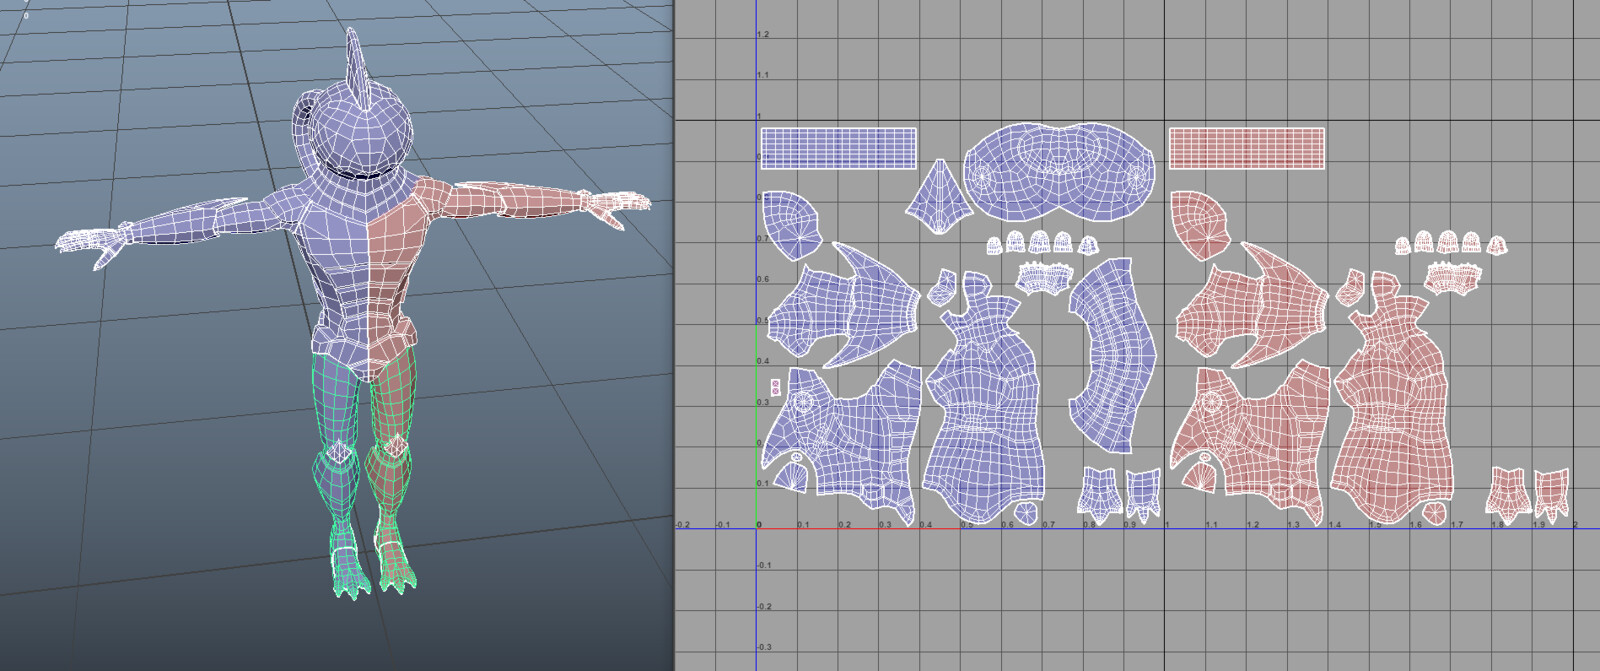 Final Mesh and UV layout. Mirrored UV's get pushed over to make painter happy.